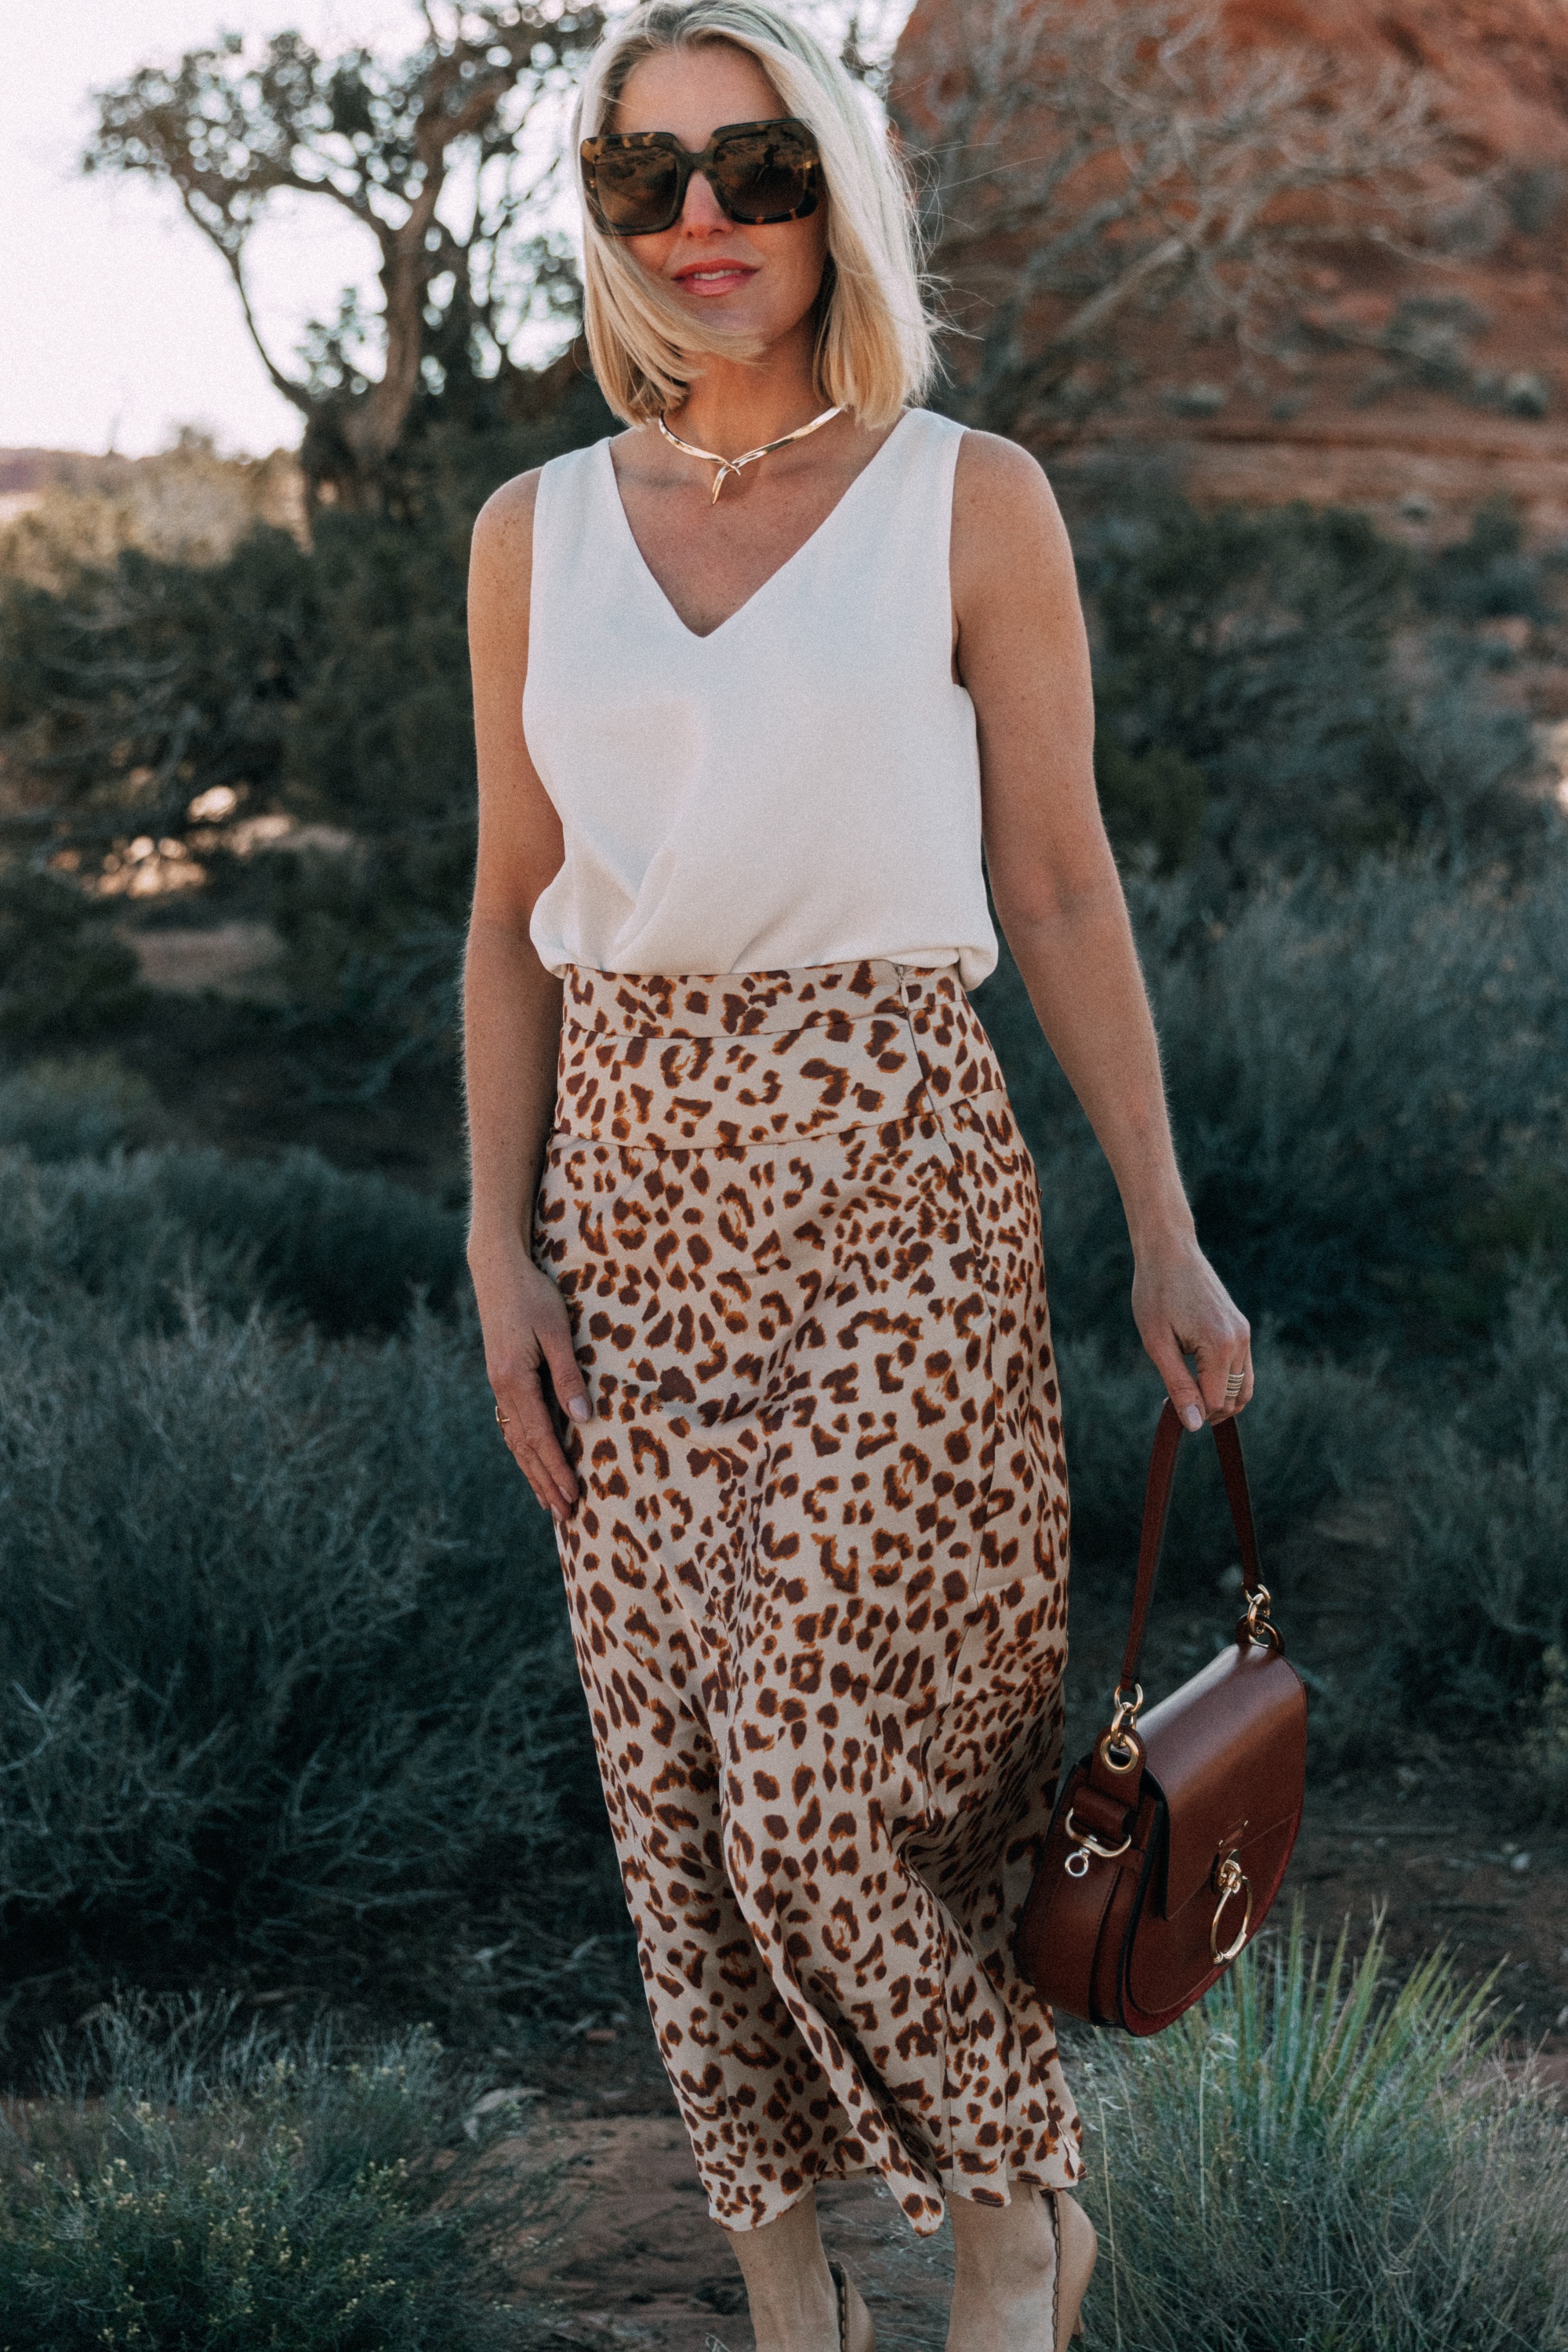 How To Wear Animal Prints, Fashion blogger Erin Busbee of BusbeeStyle.com wearing a white AQUA tank from bloomingdale's with a leopard print midi skirt by Free People in Moab, Utah